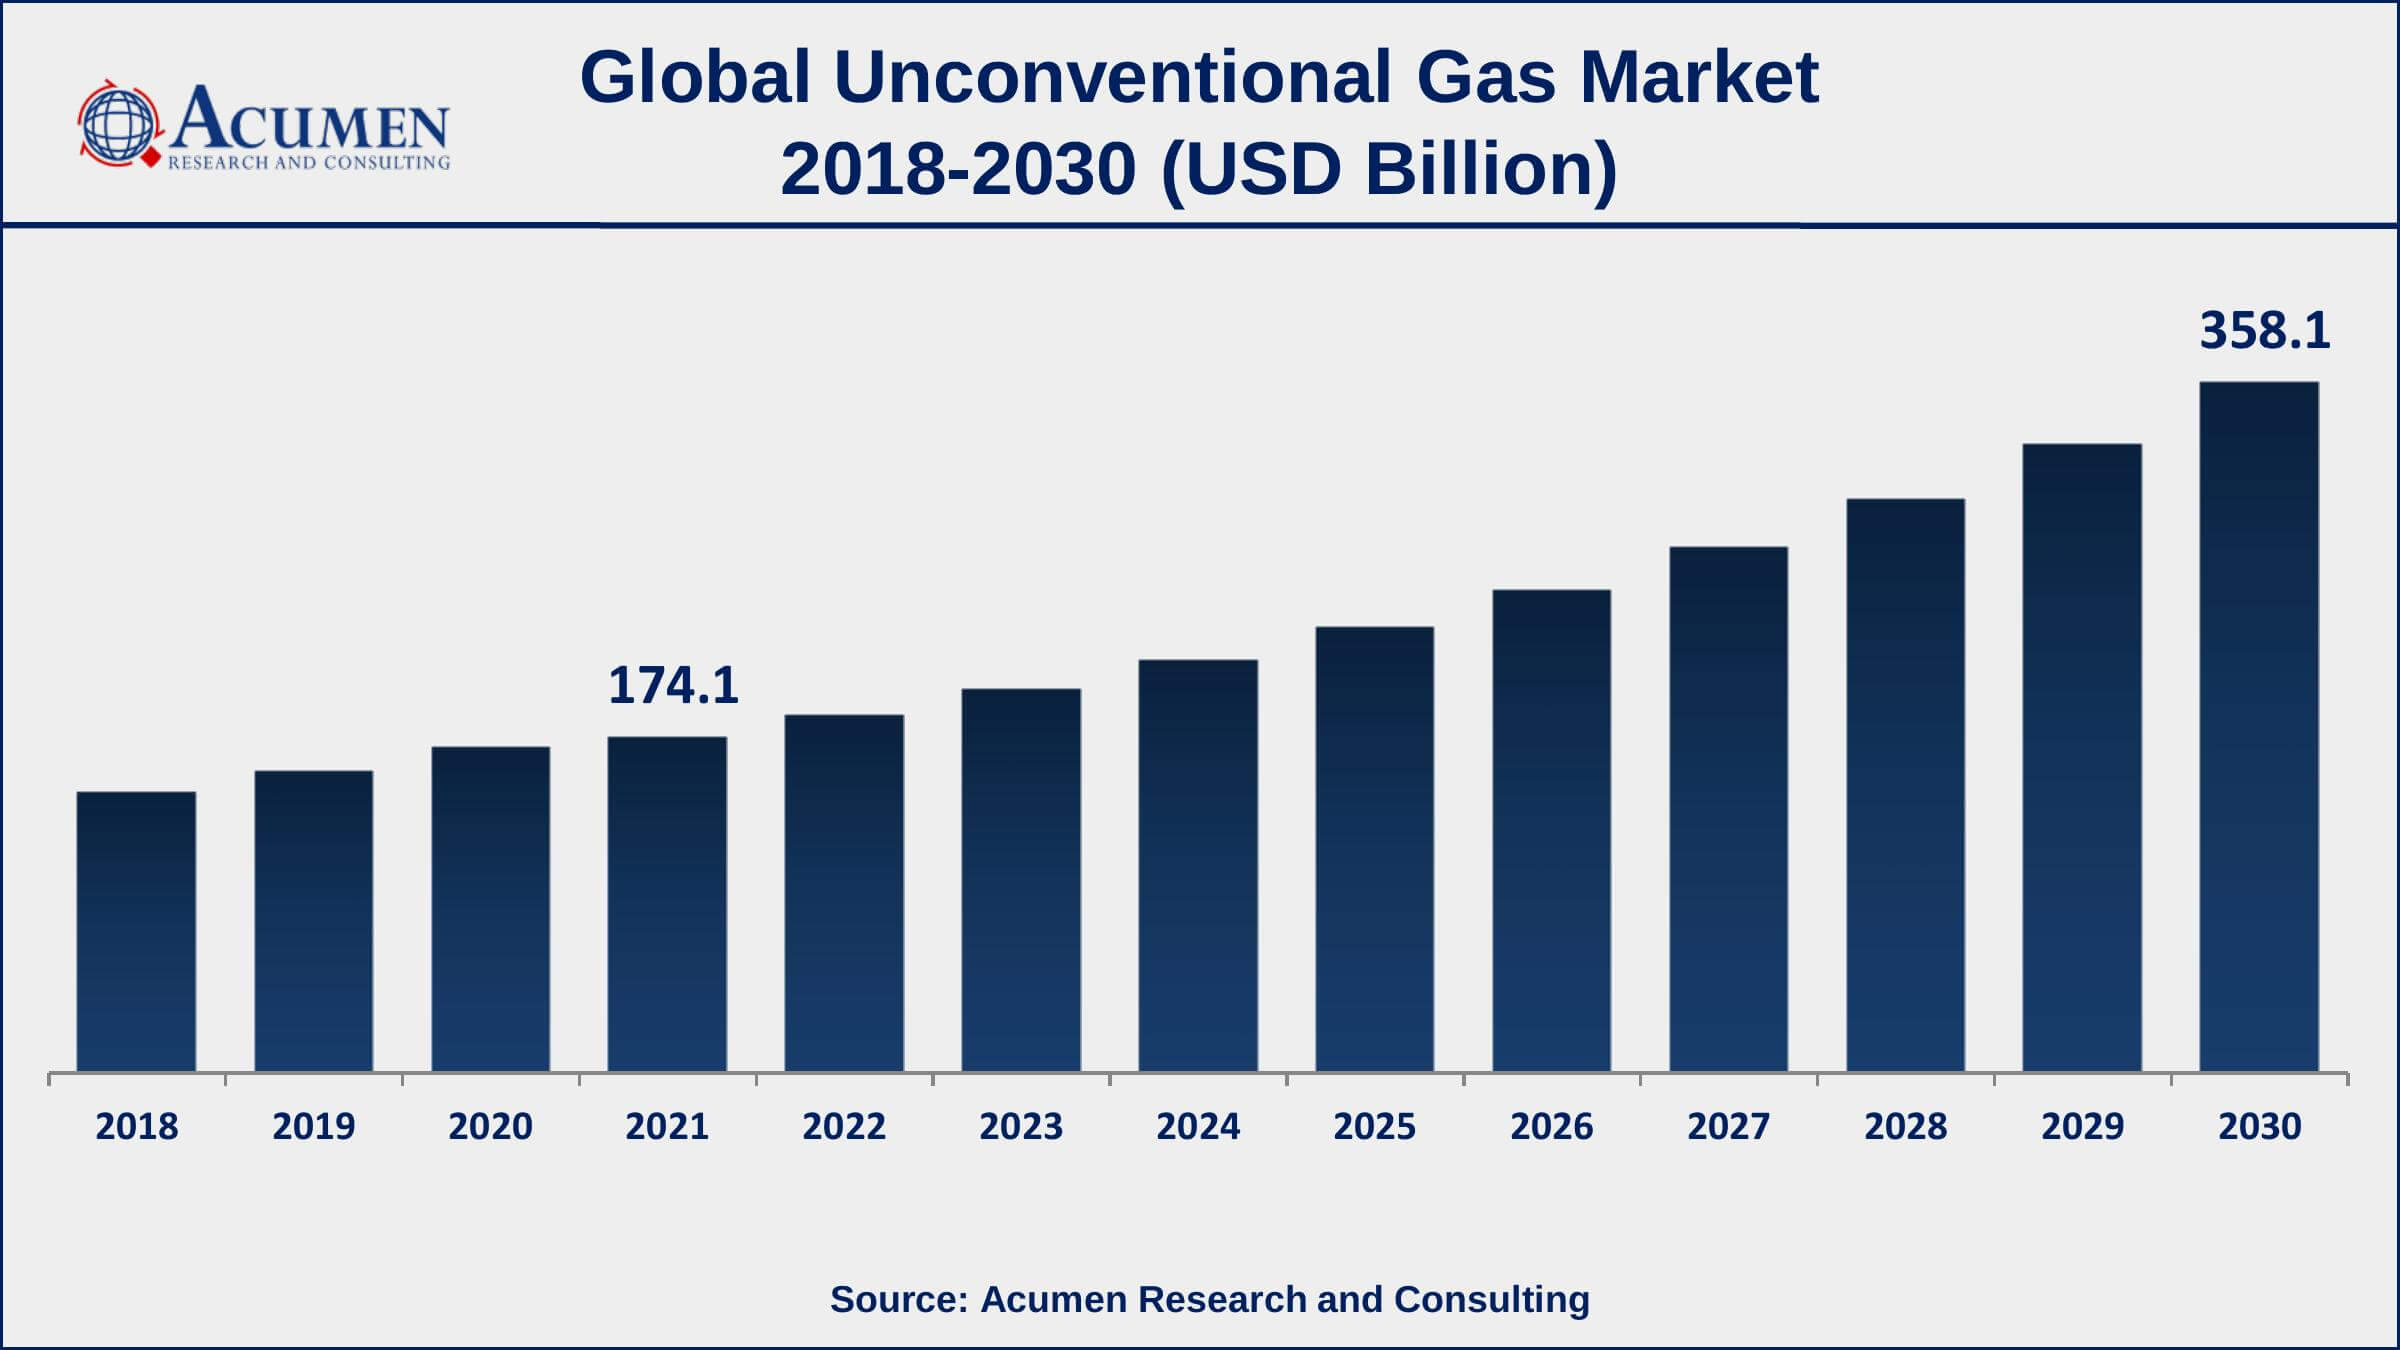 Asia-Pacific unconventional gas market growth will observe highest CAGR from 2022 to 2030